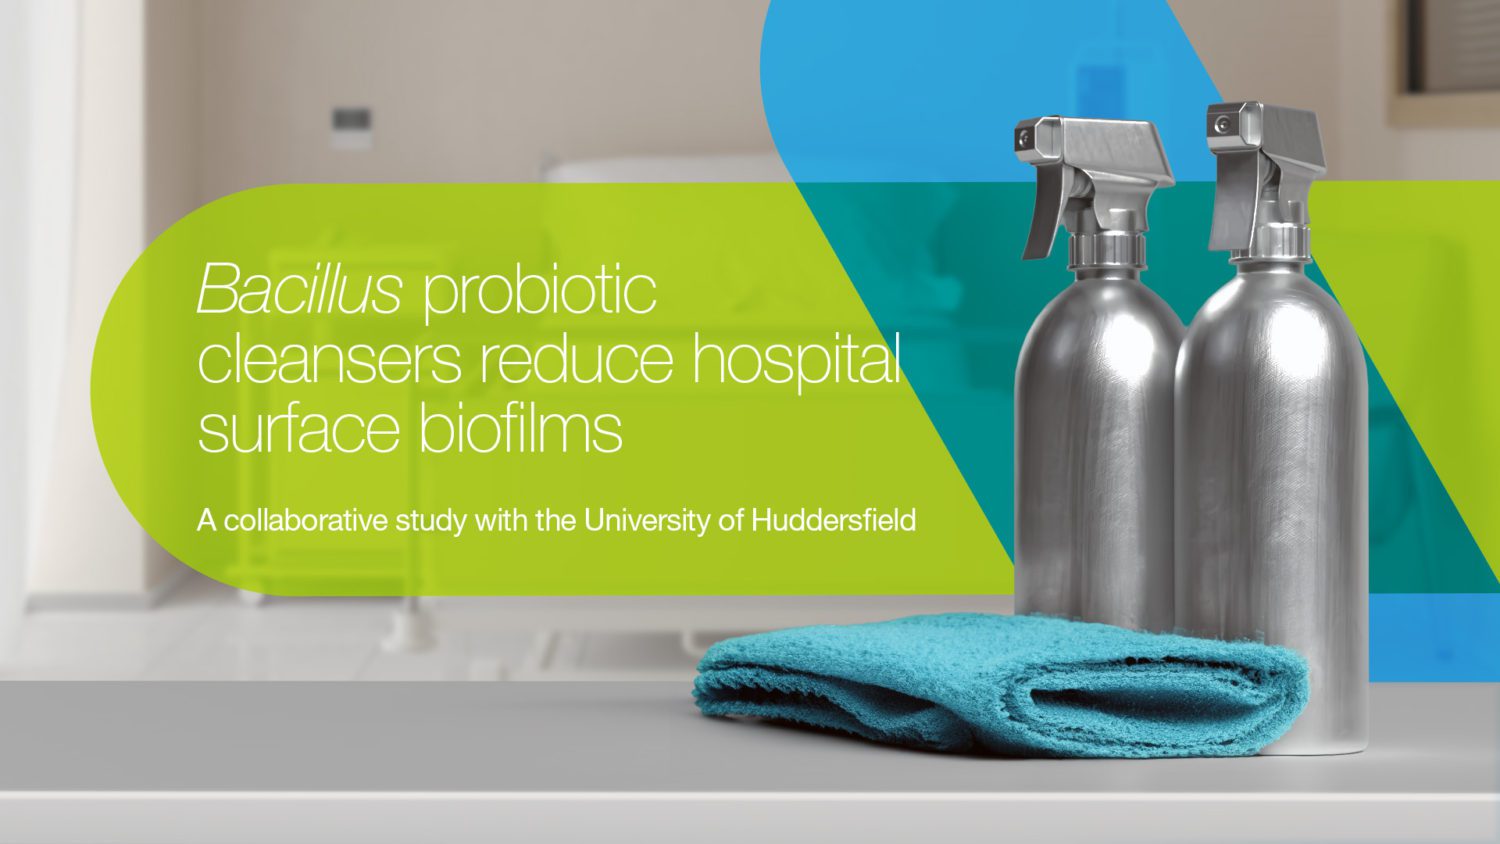 Bacillus probiotic cleansers reduce hospital surface biofilms – a collaborative study with University of Huddersfield